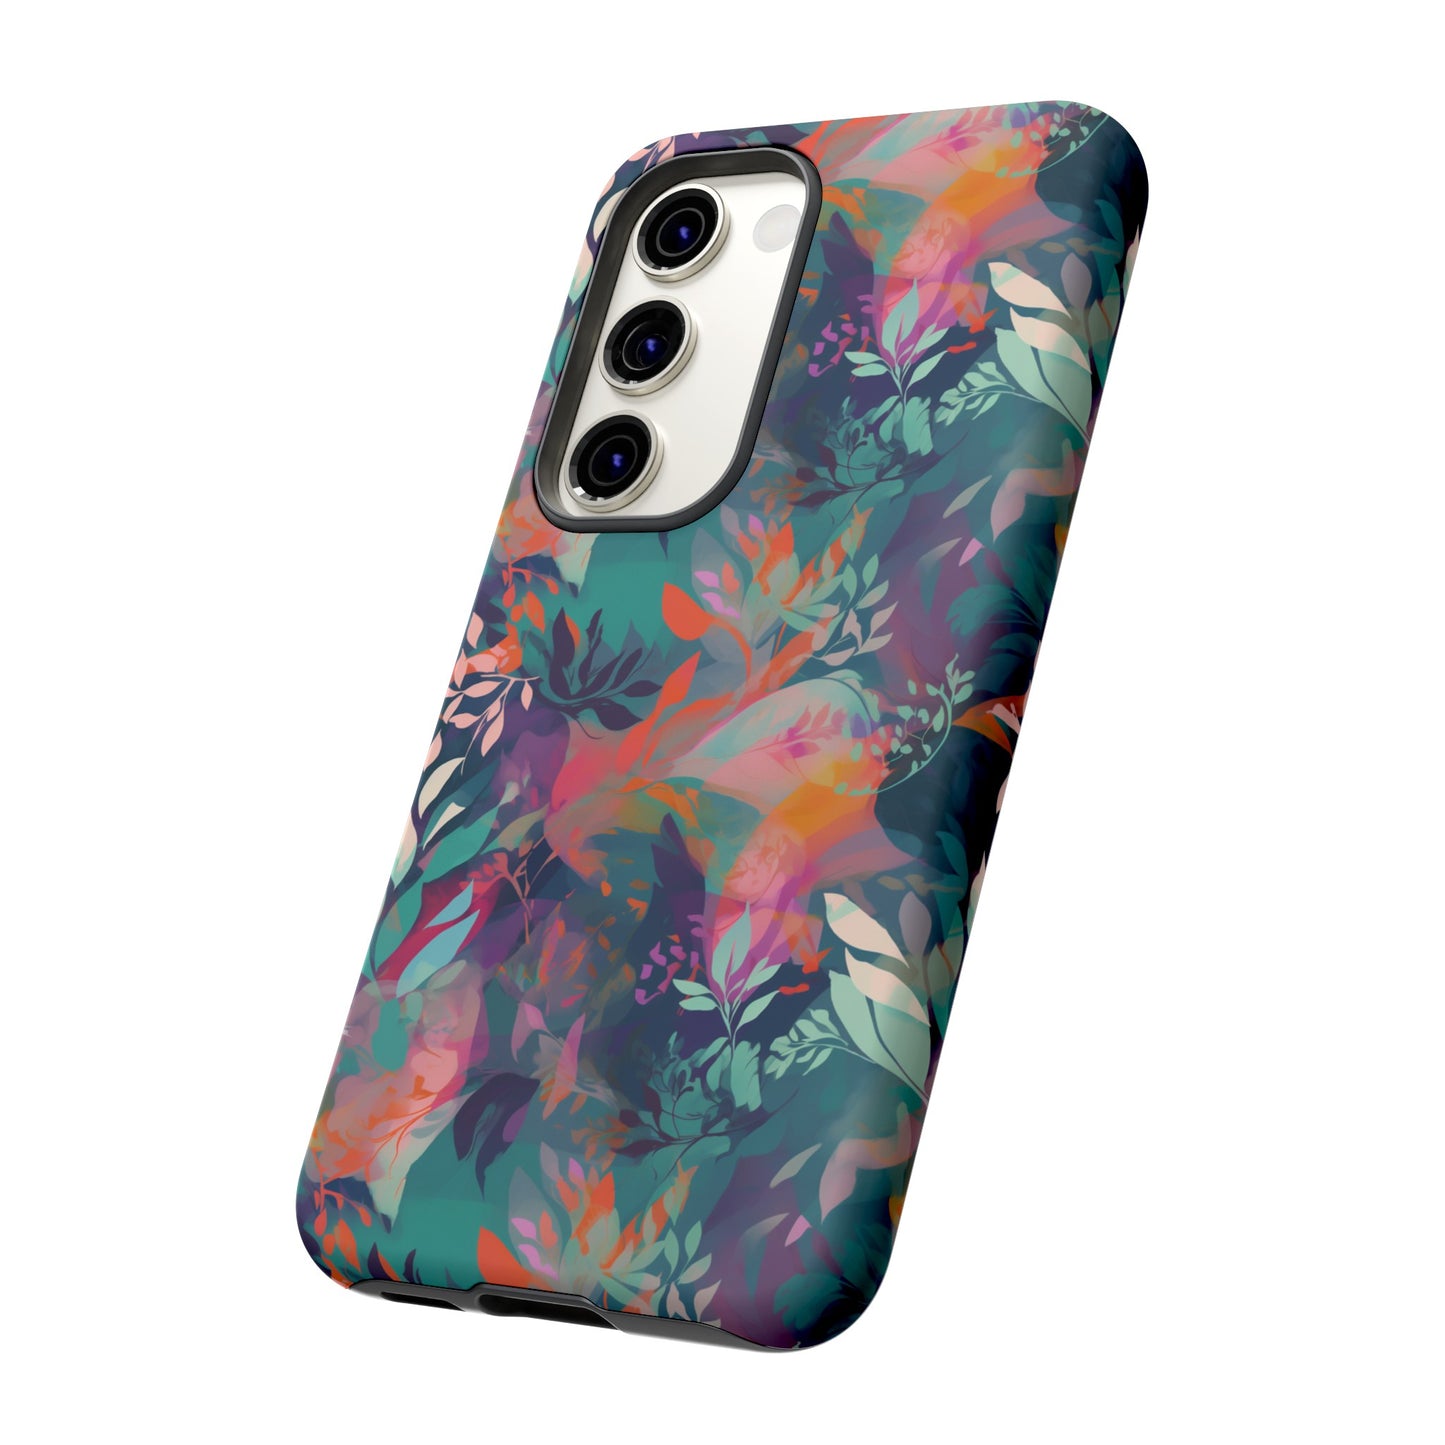 Botanical Bliss - Stylized Abstract Flower Design Tough Phone Case